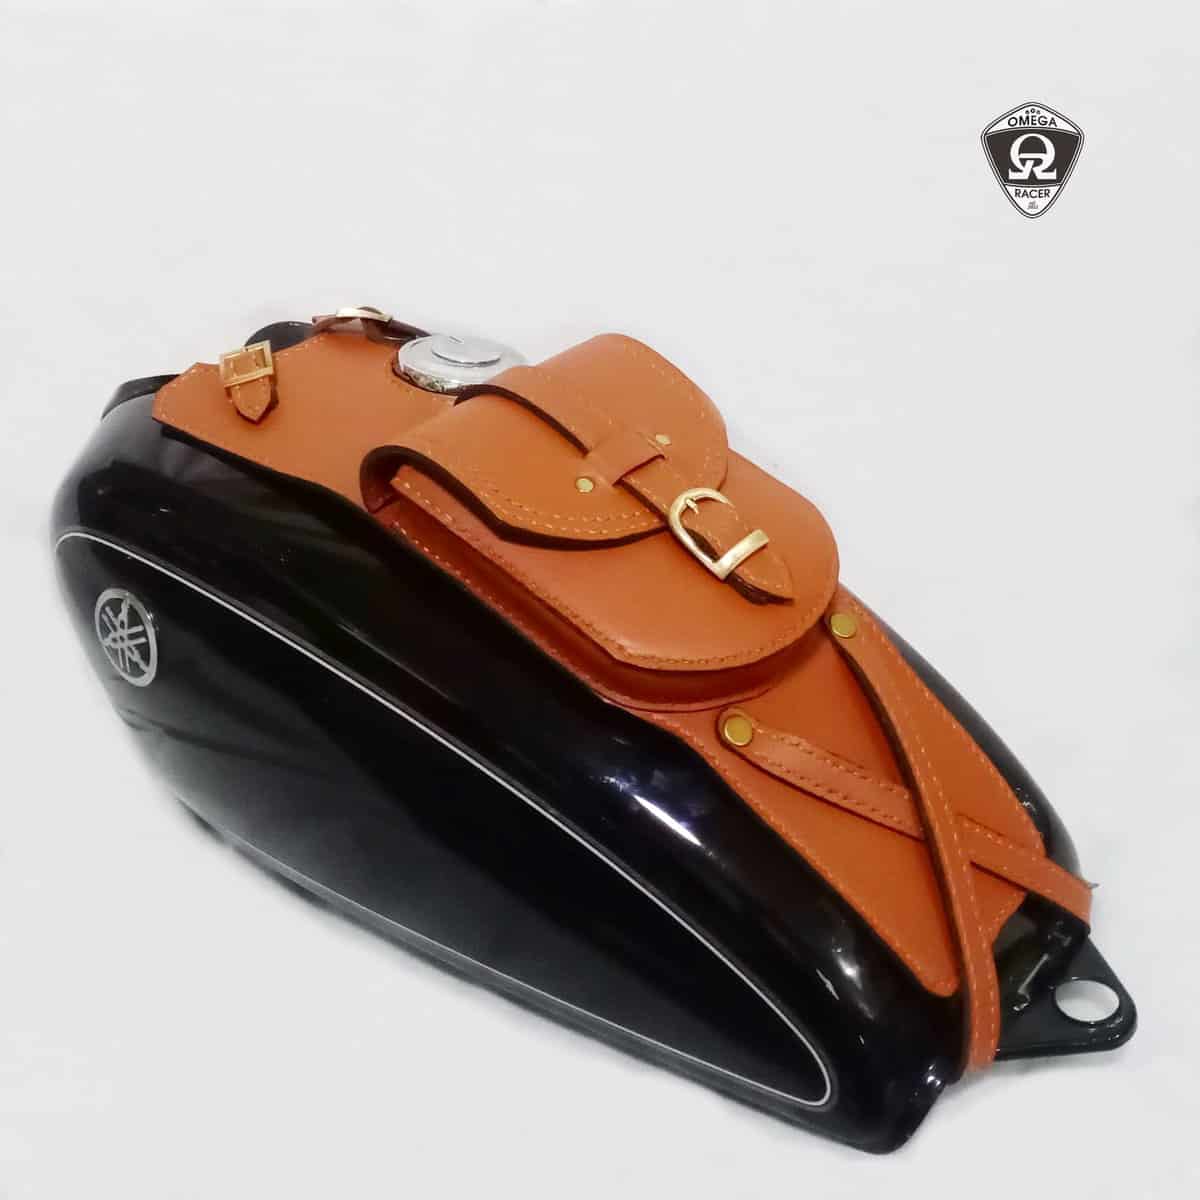 Yamaha SR400 – Genuine Leather Tank Strap and Pouch